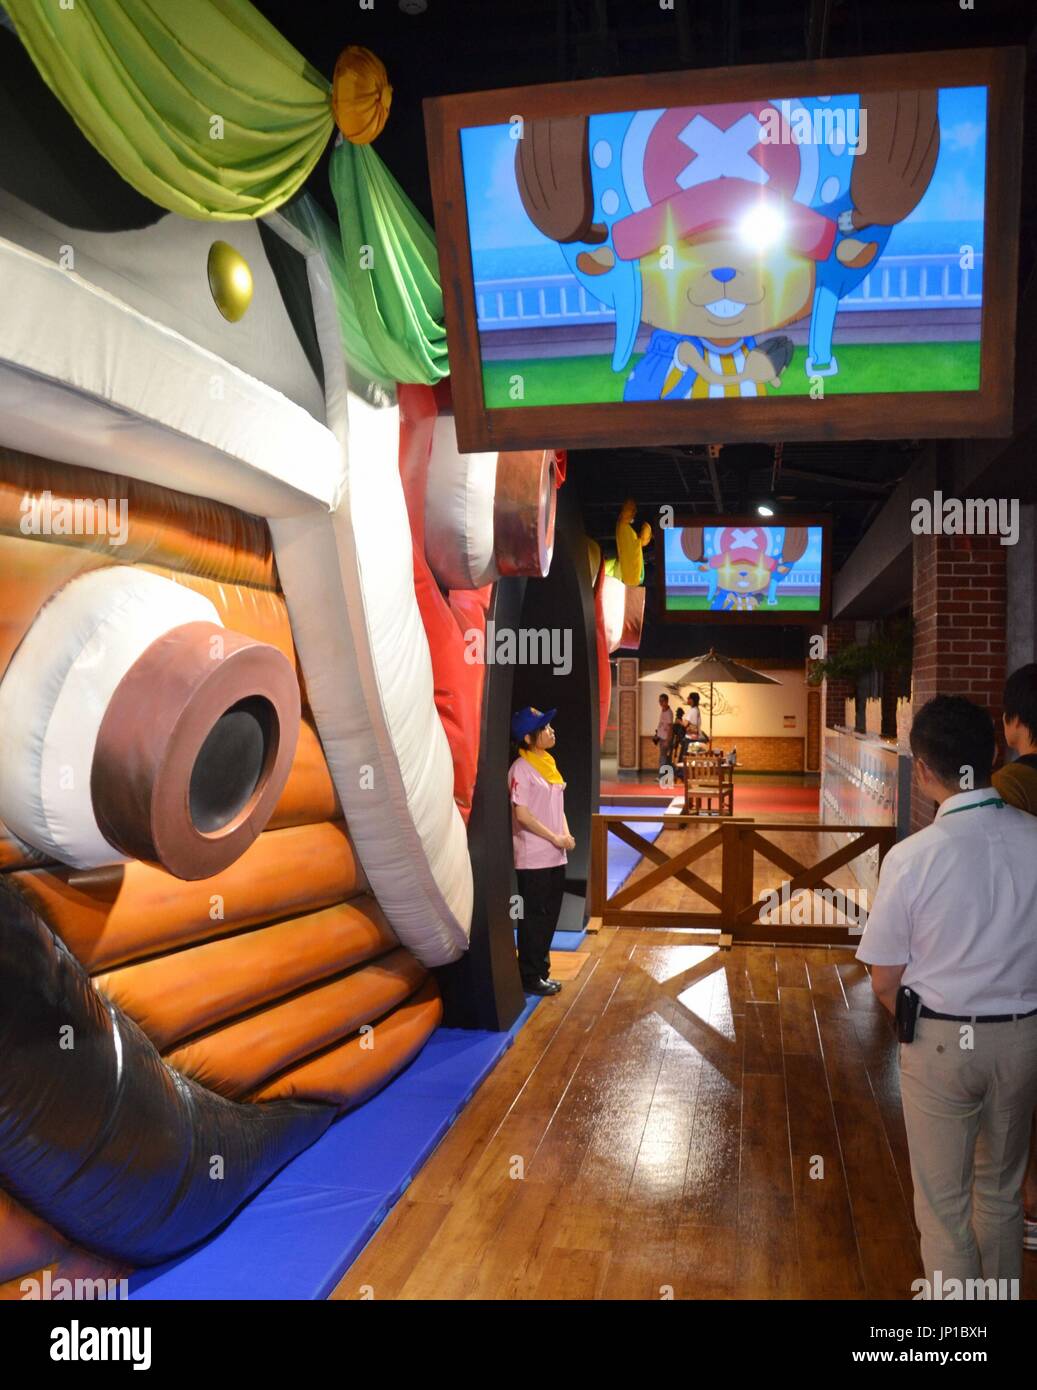 Tokyo Japan Namco Ltd Unveils J World Tokyo An Indoor Theme Park Featuring The Comics Magazine Weekly Shonen Jump In Tokyo S Ikebukuro Area On July 9 13 The Facility With Attractions Based